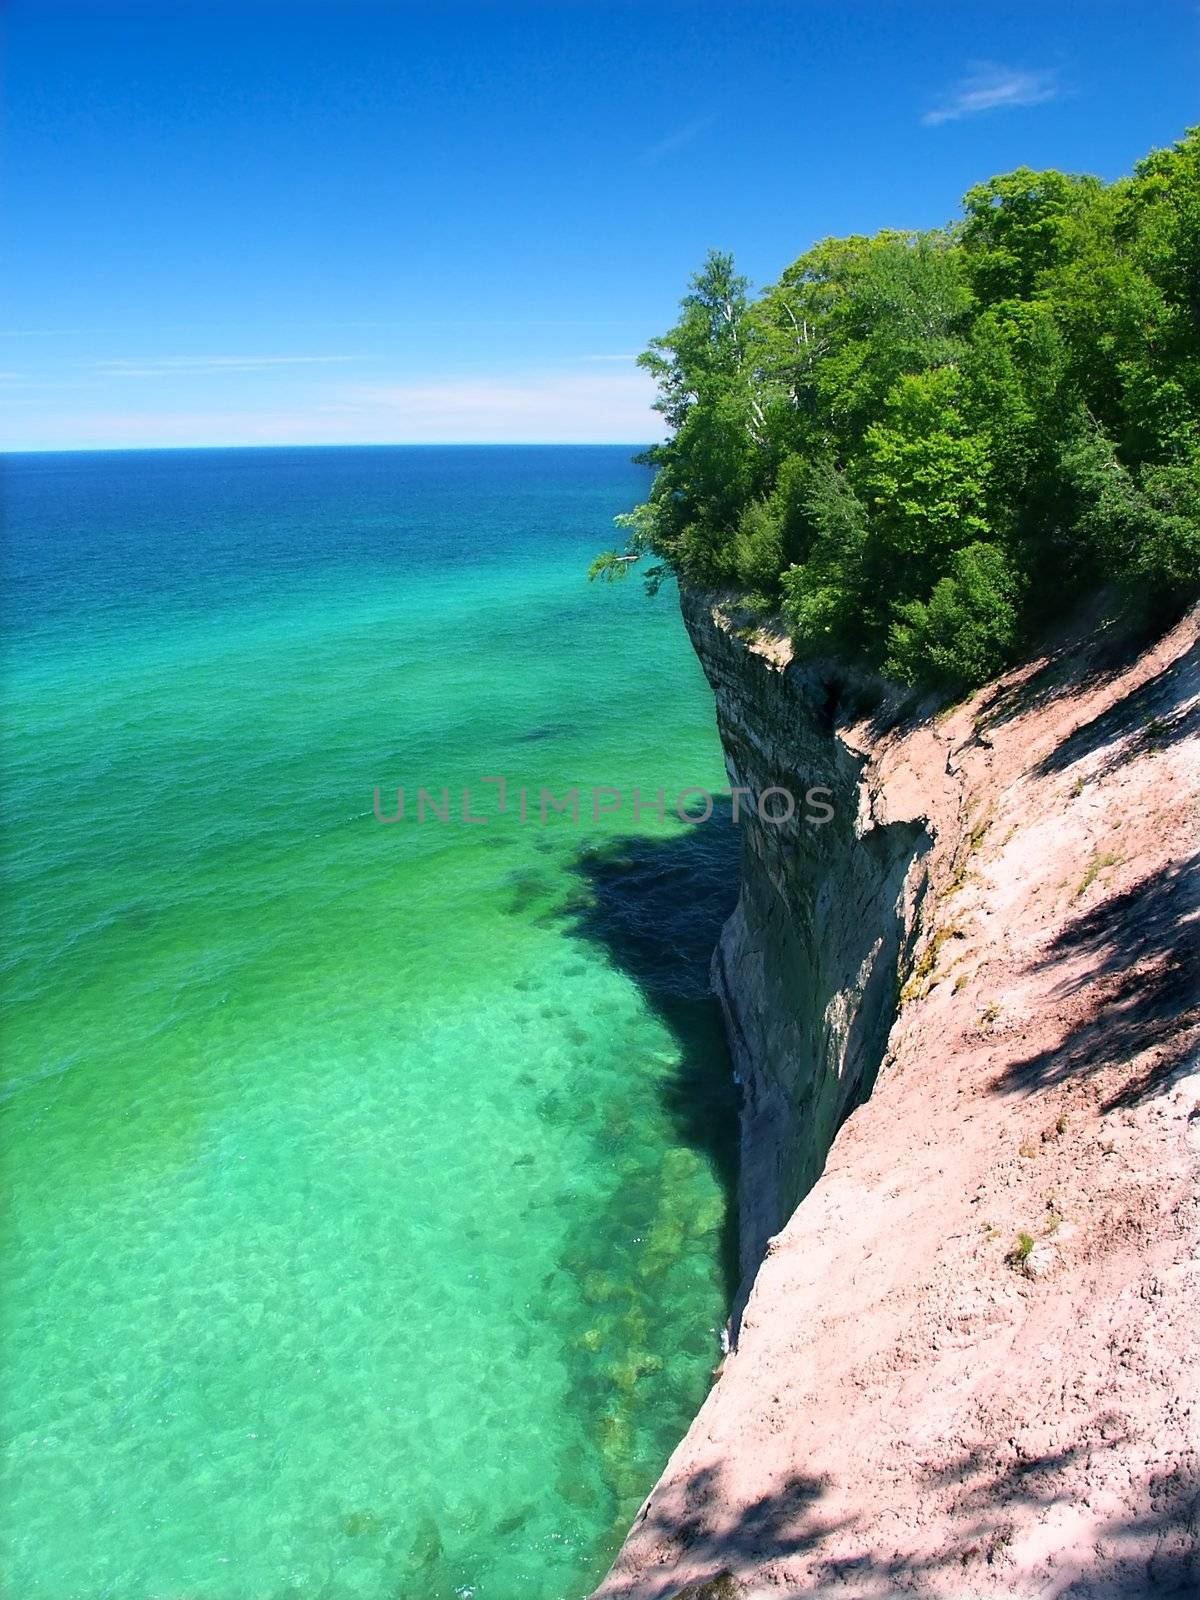 Pictured Rocks - Michigan UP by Wirepec